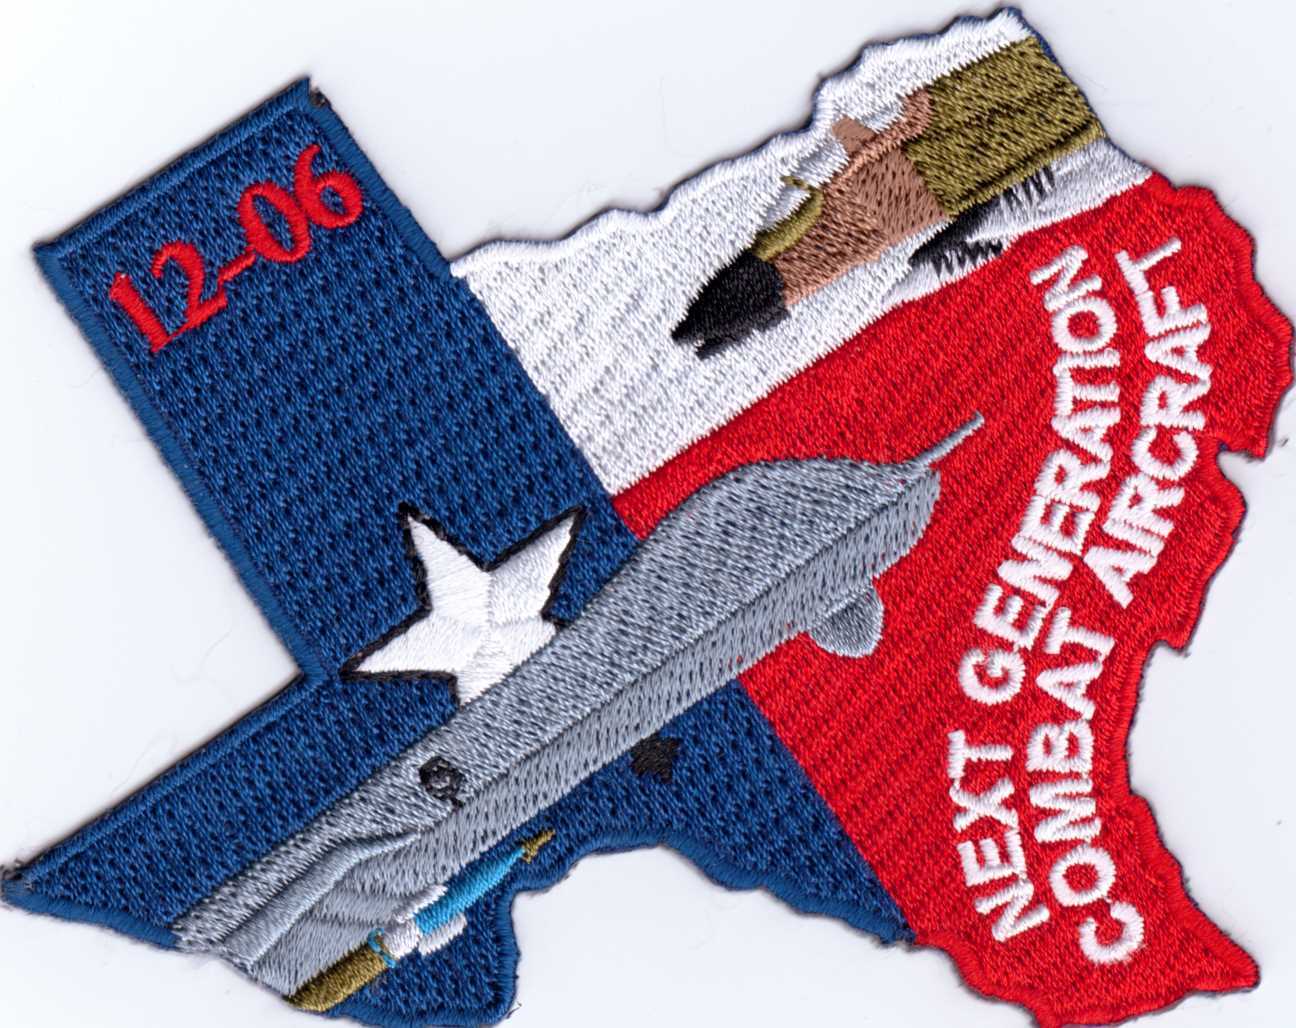 USAF PILOT TRAINING PATCH Combat System Officer Training class Randolph AFB TX